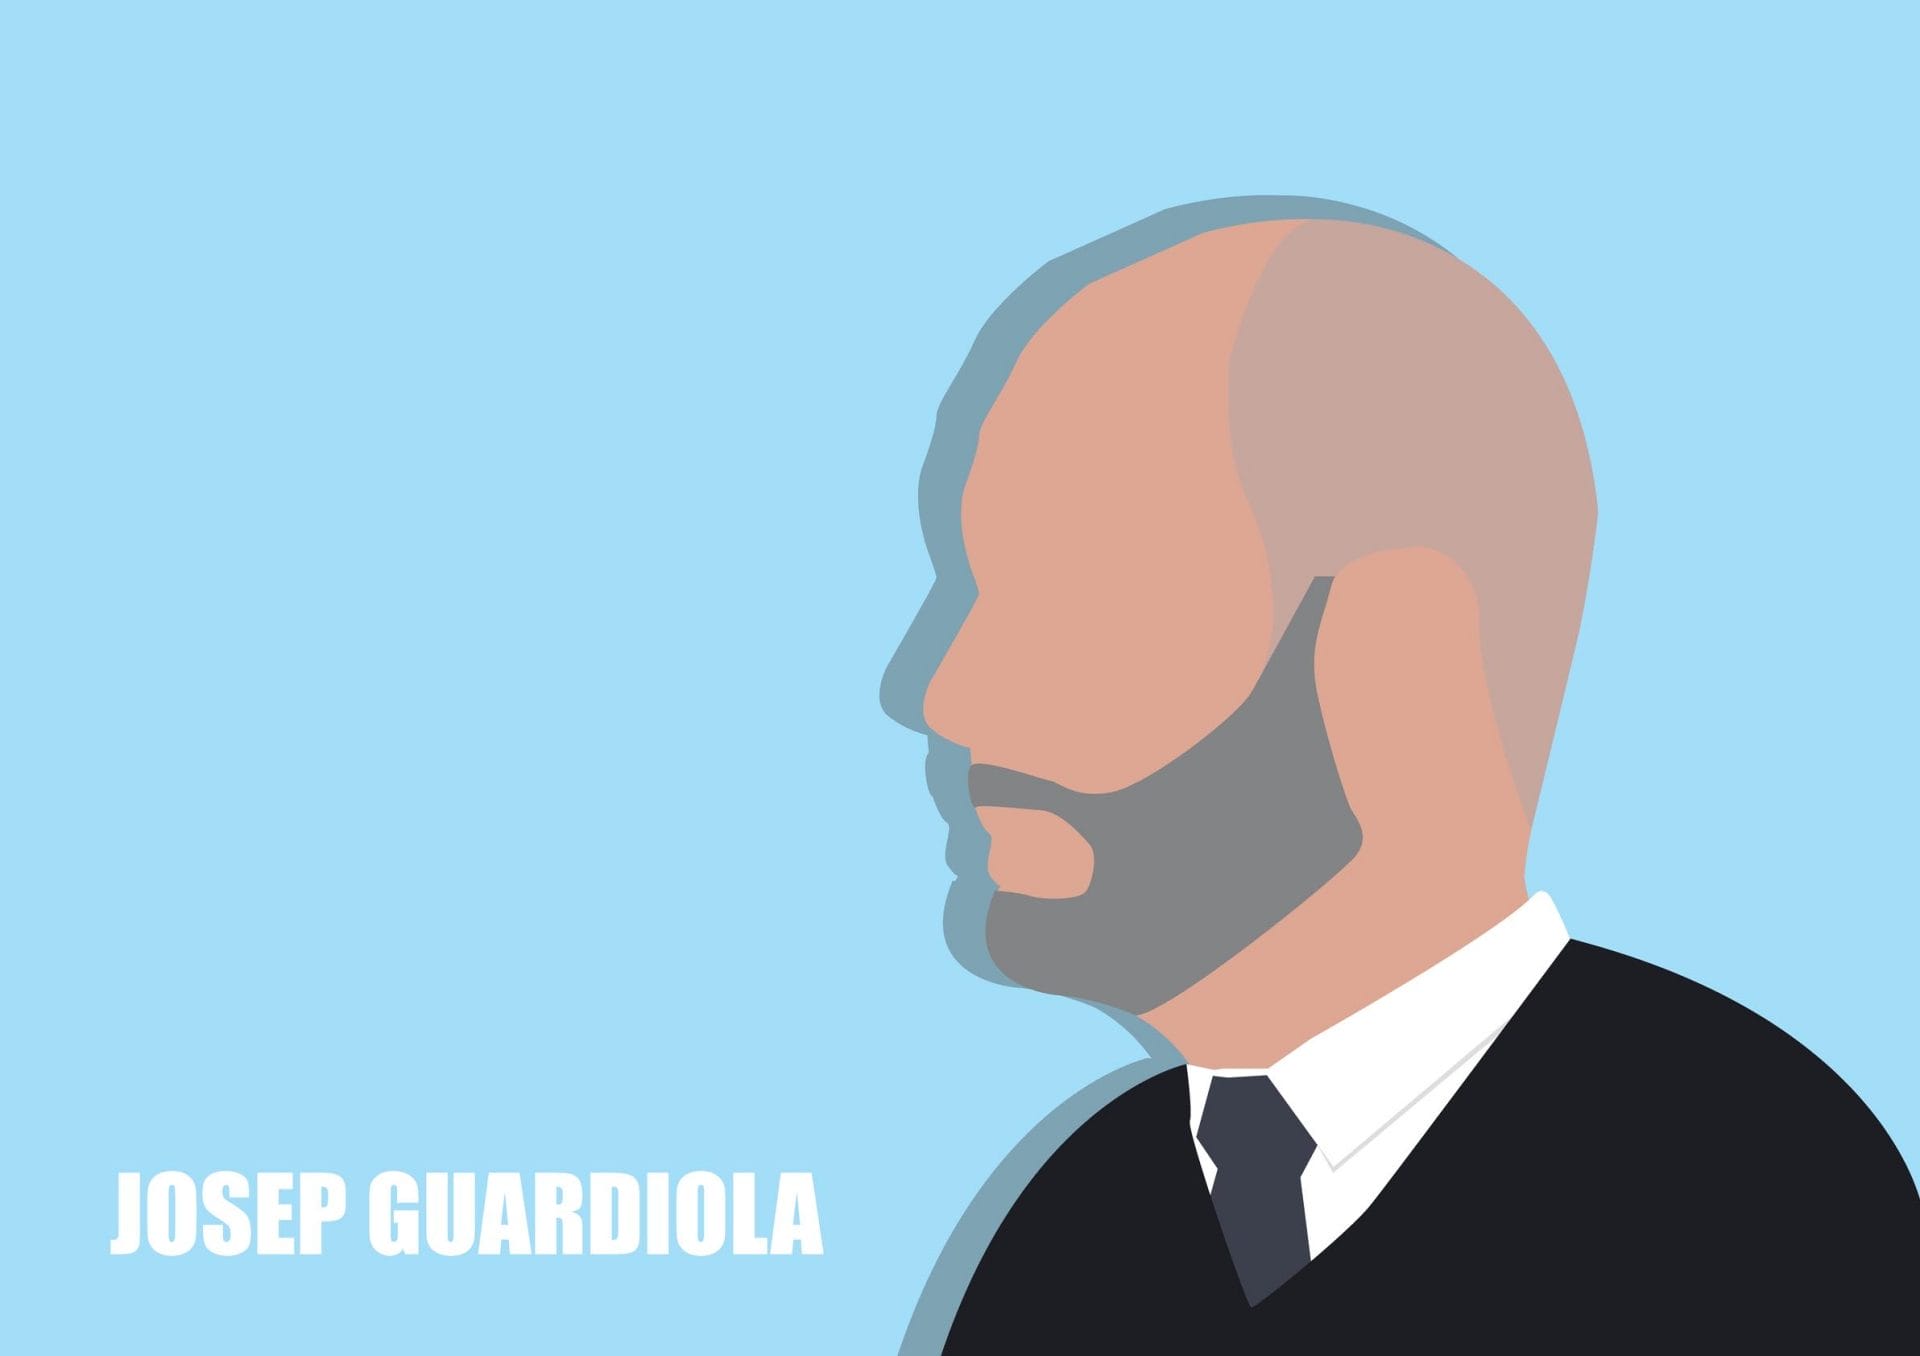 Illustration of Josep Guardiola, The Manager of Manchester City Football Club on February 6,2021